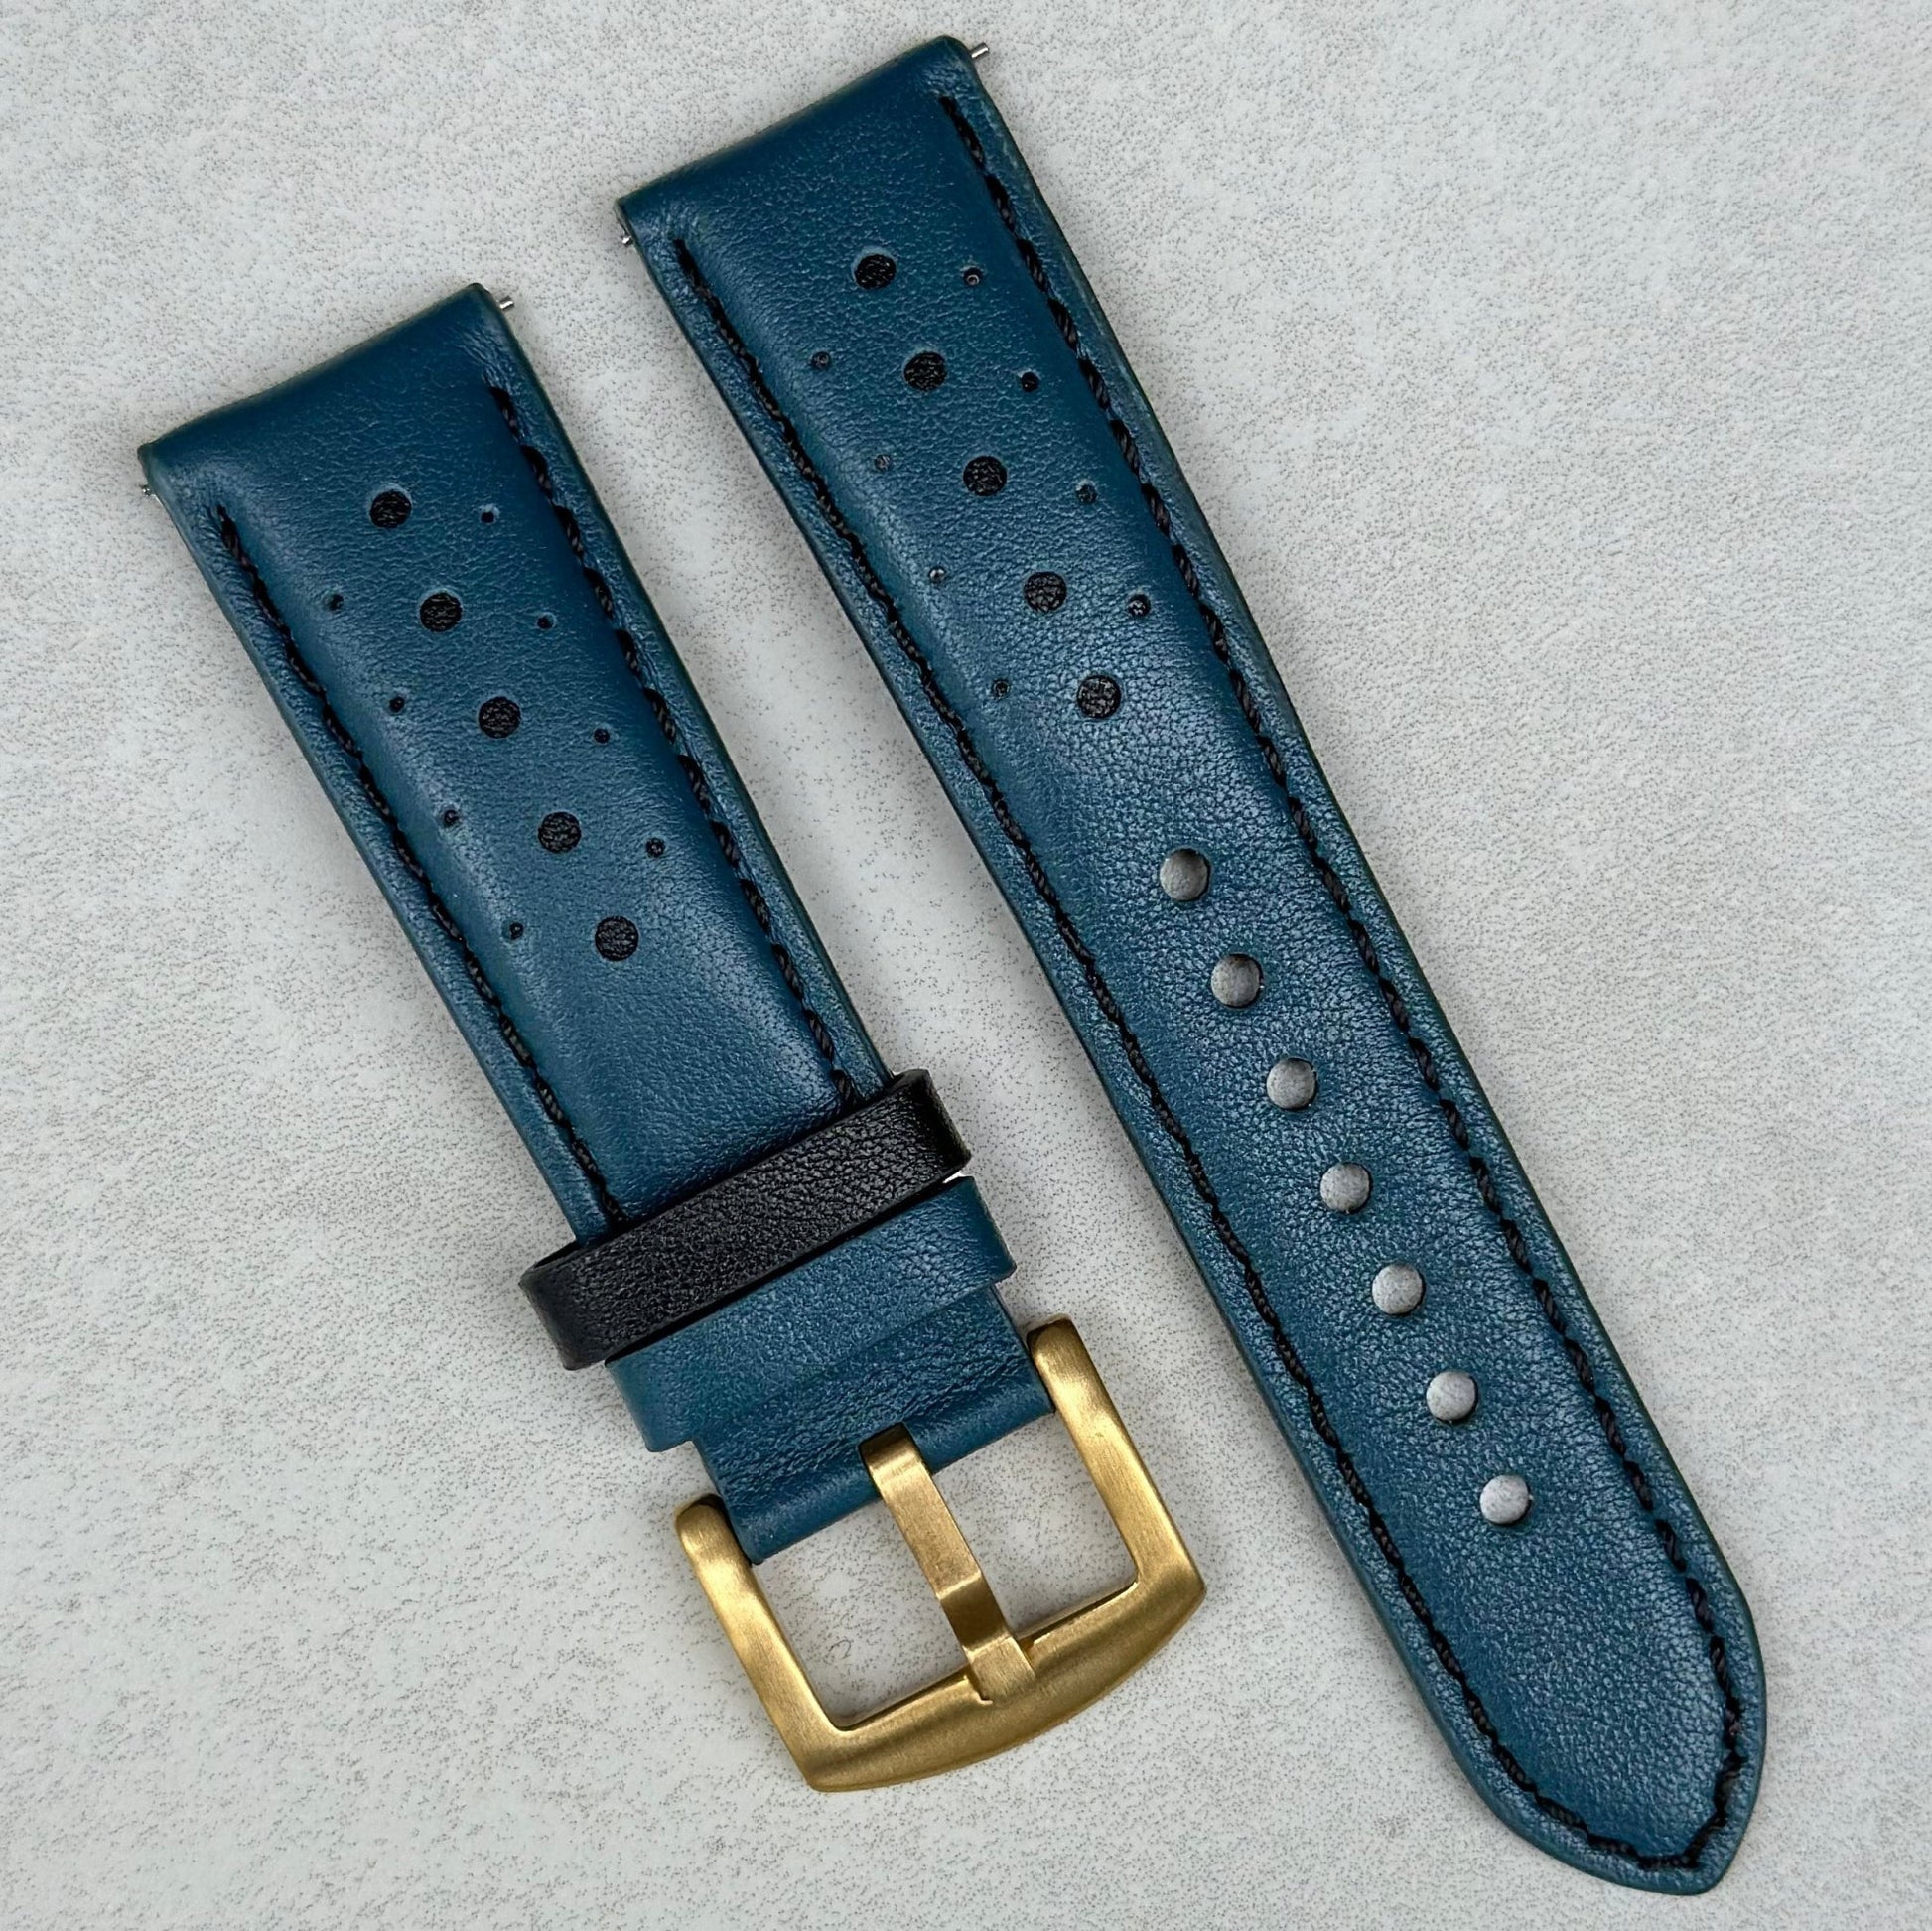 Le Man petrol blue and black full grain leather racing watch strap. PVD gold buckle.